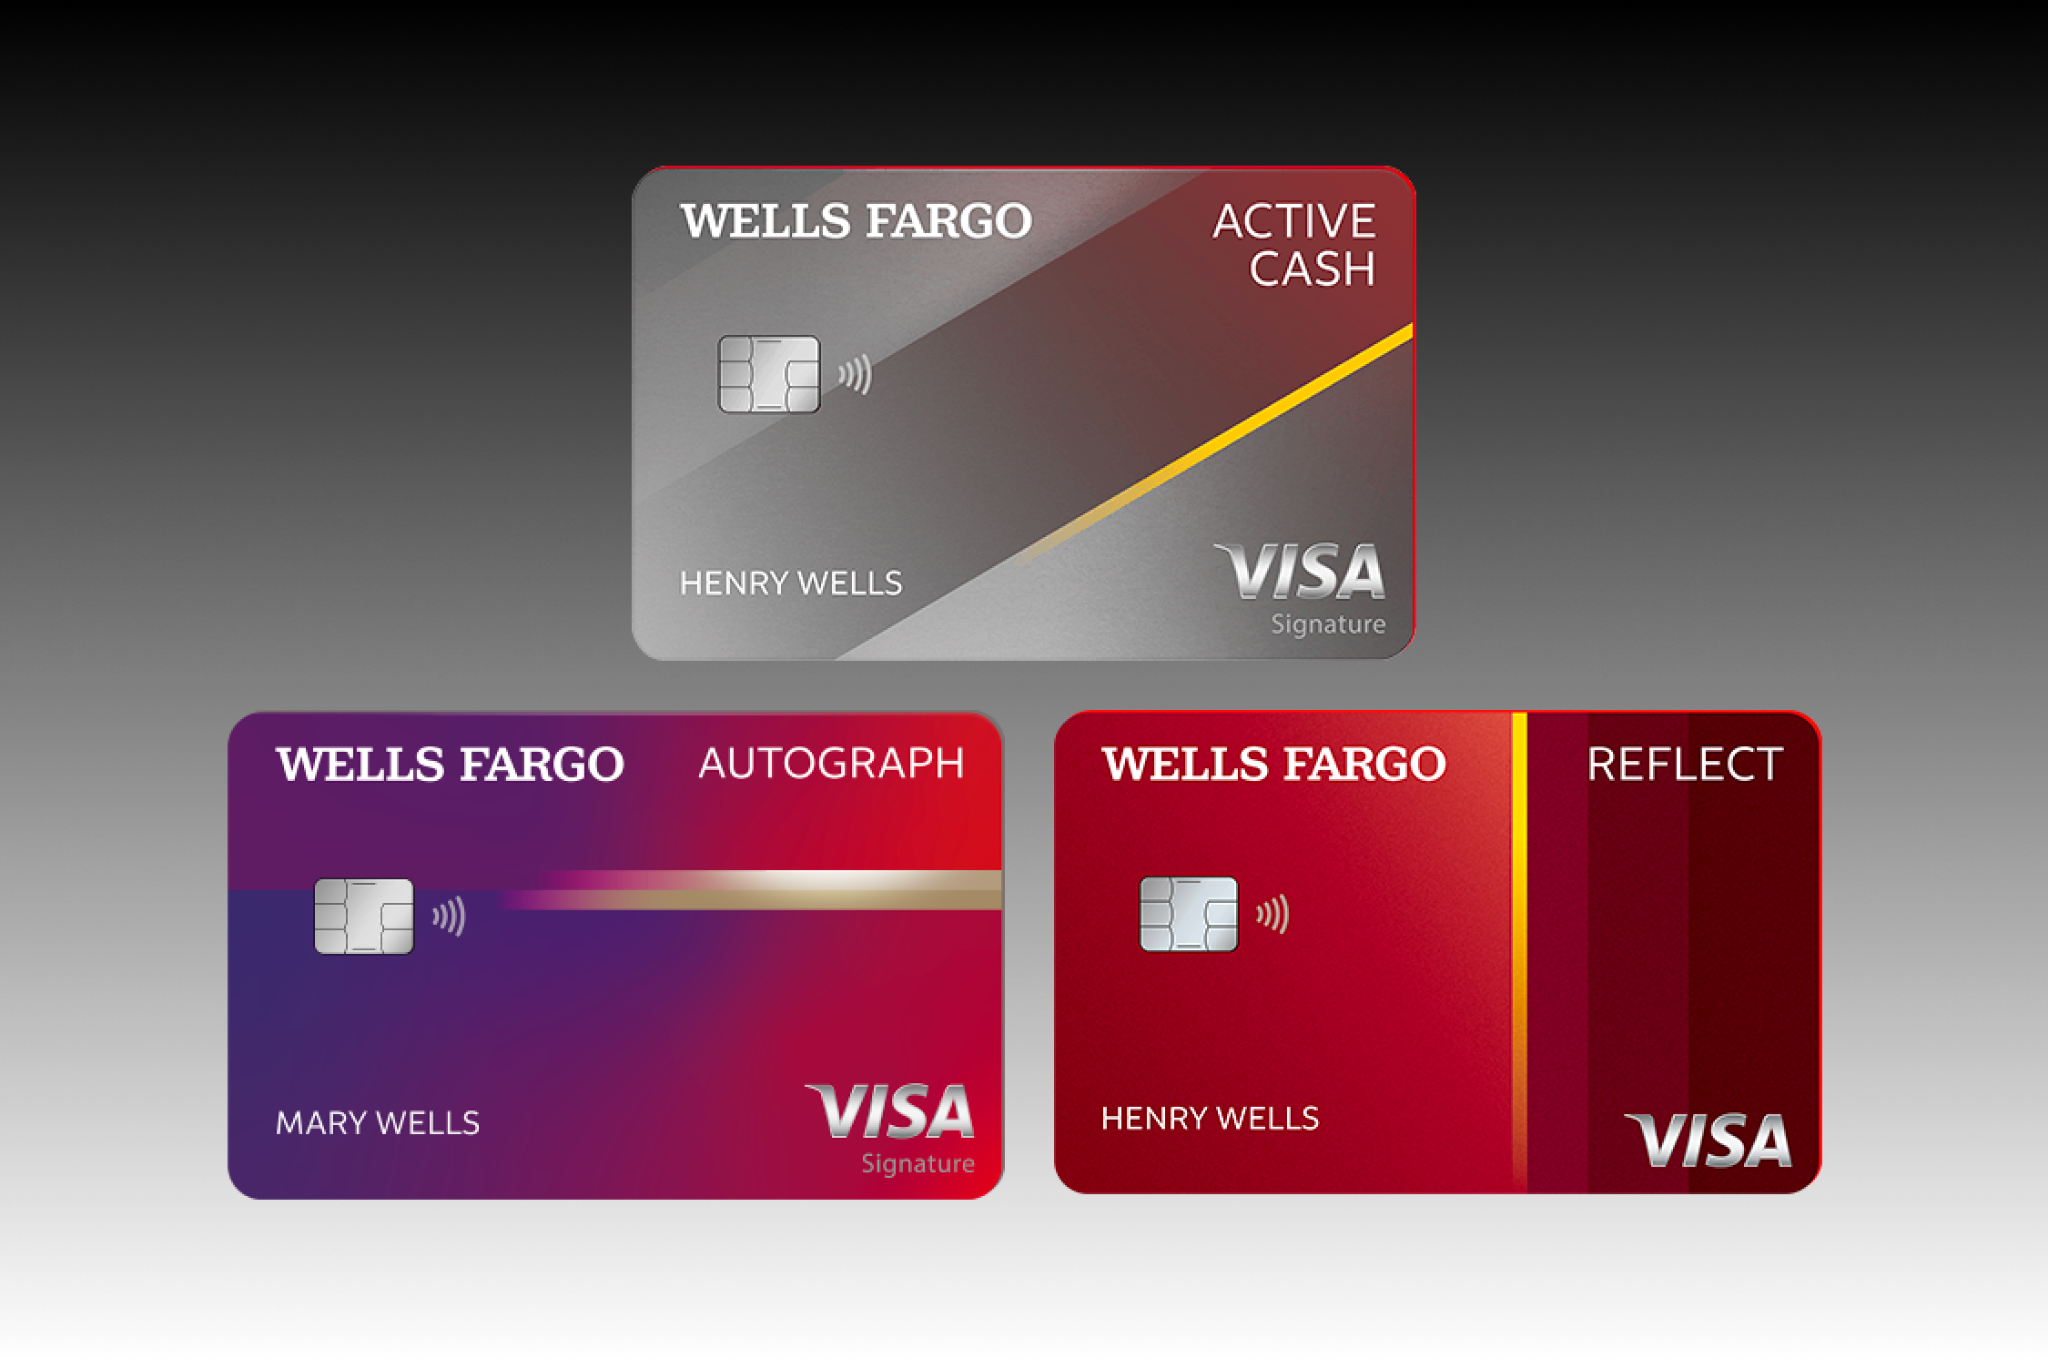 Wells Fargo - Simplify Your Transactions with Our Credit Cards